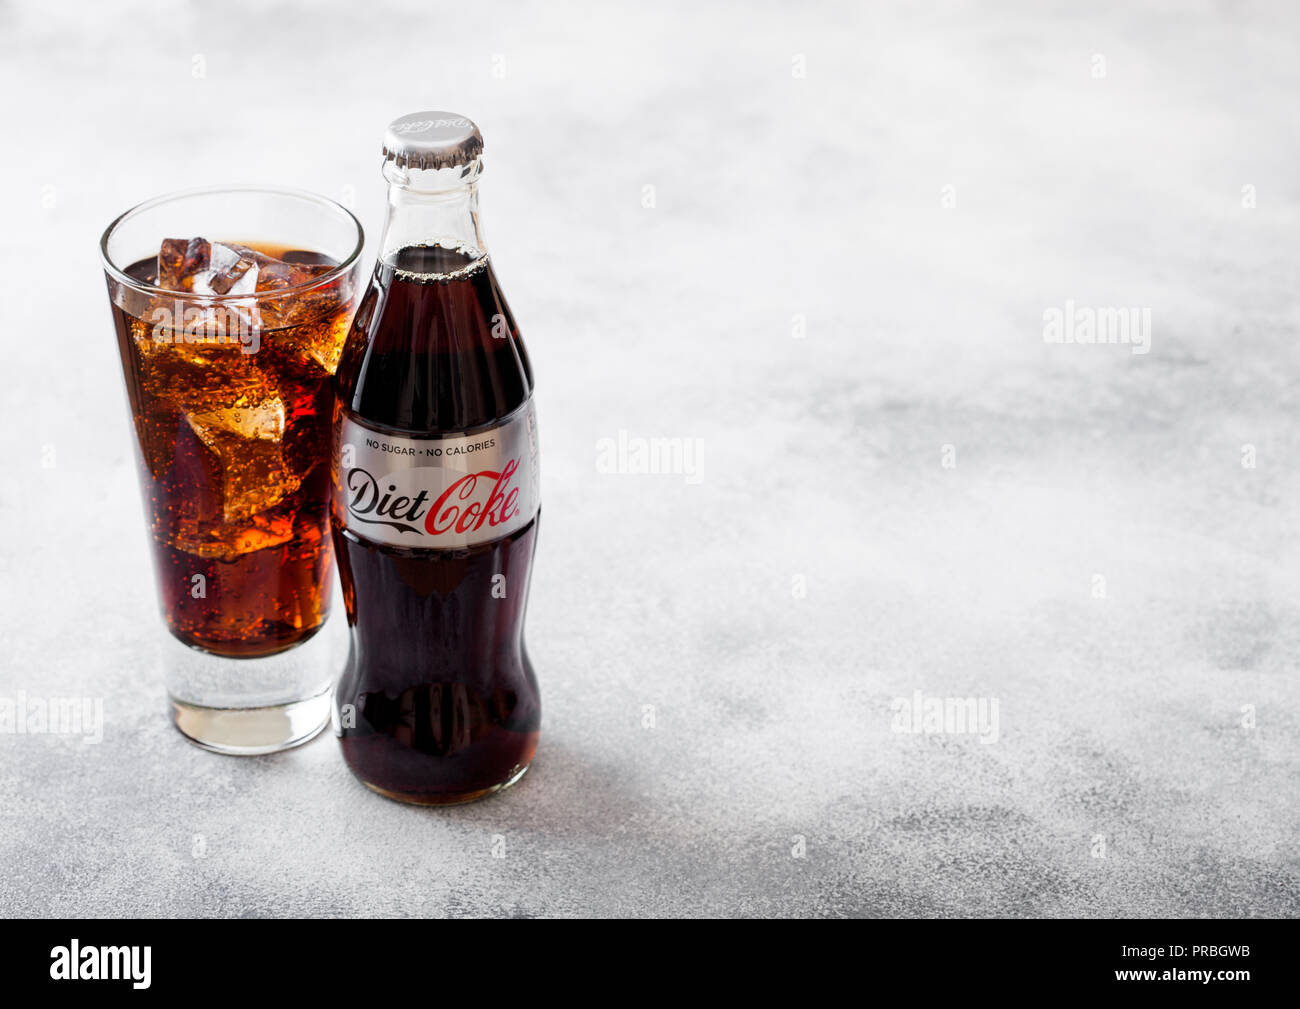 LONDON, UK - SEPTEMBER 28, 2018: Glass and bottle of Diet Coke Coca Cola  soda drink with ice cubes and bubbles on stone kitchen background Stock  Photo - Alamy